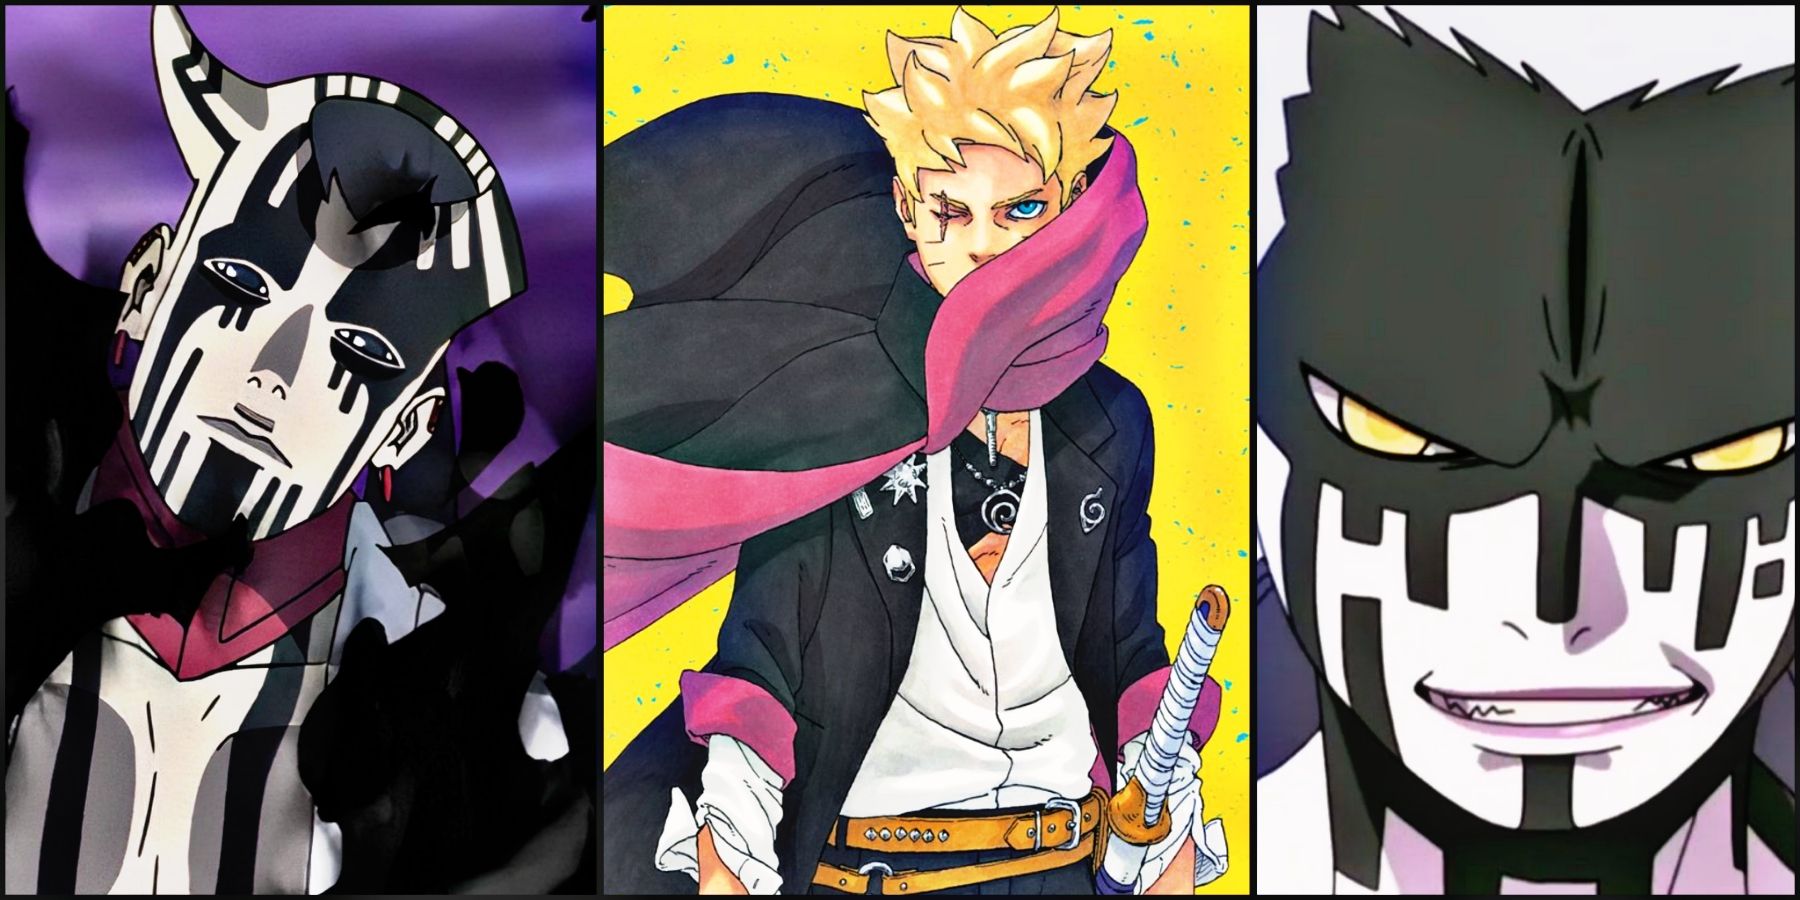 We're gonna have Boruto manga design in Code arc. Do you like it